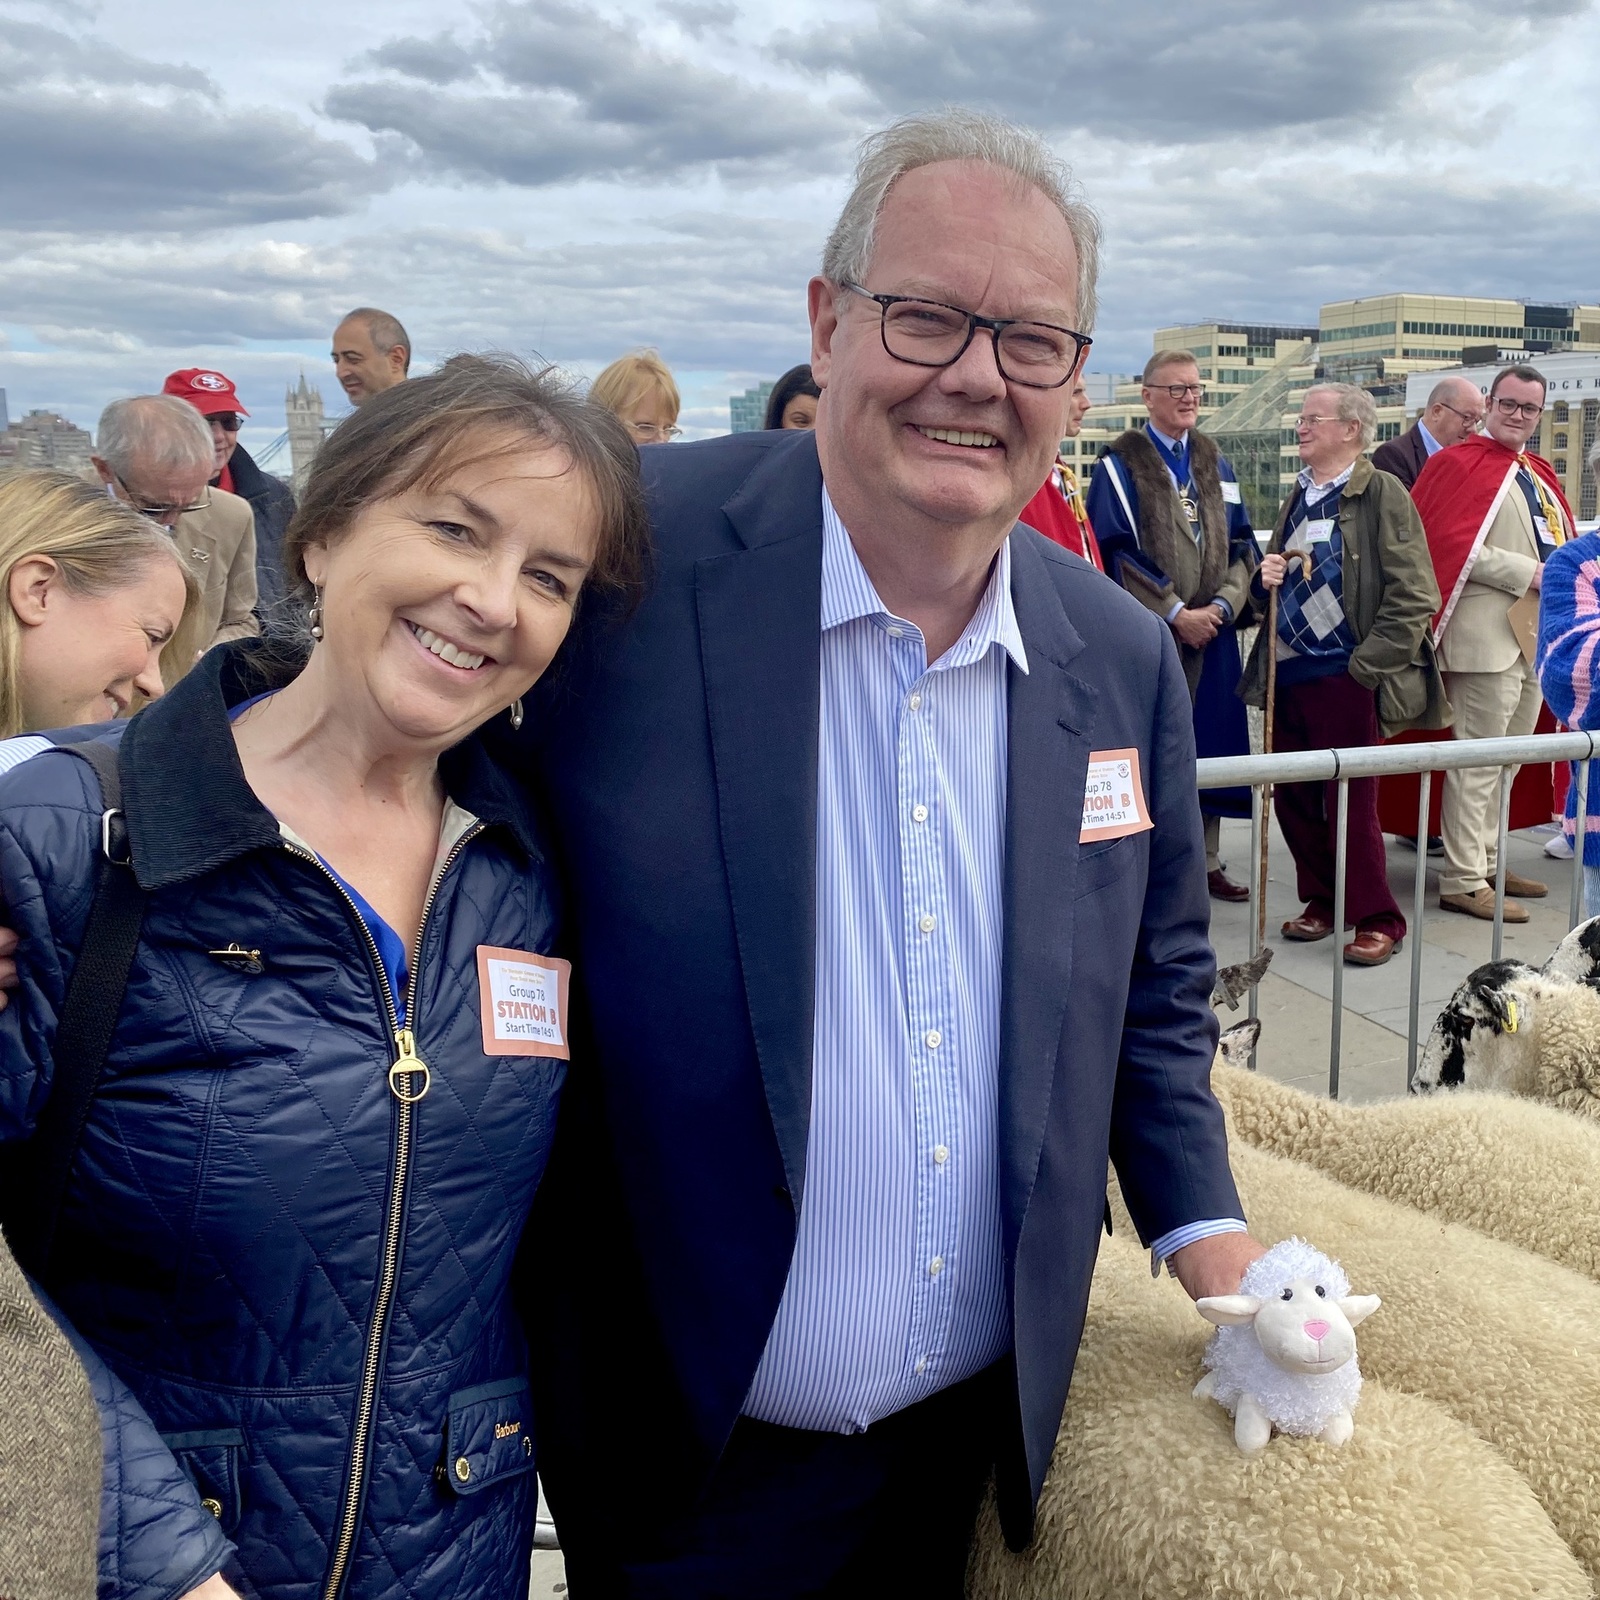 25 Sept 22 - Marian and I exercised our right at the Woolman’s extraordinarily well organised Sheep Drive.